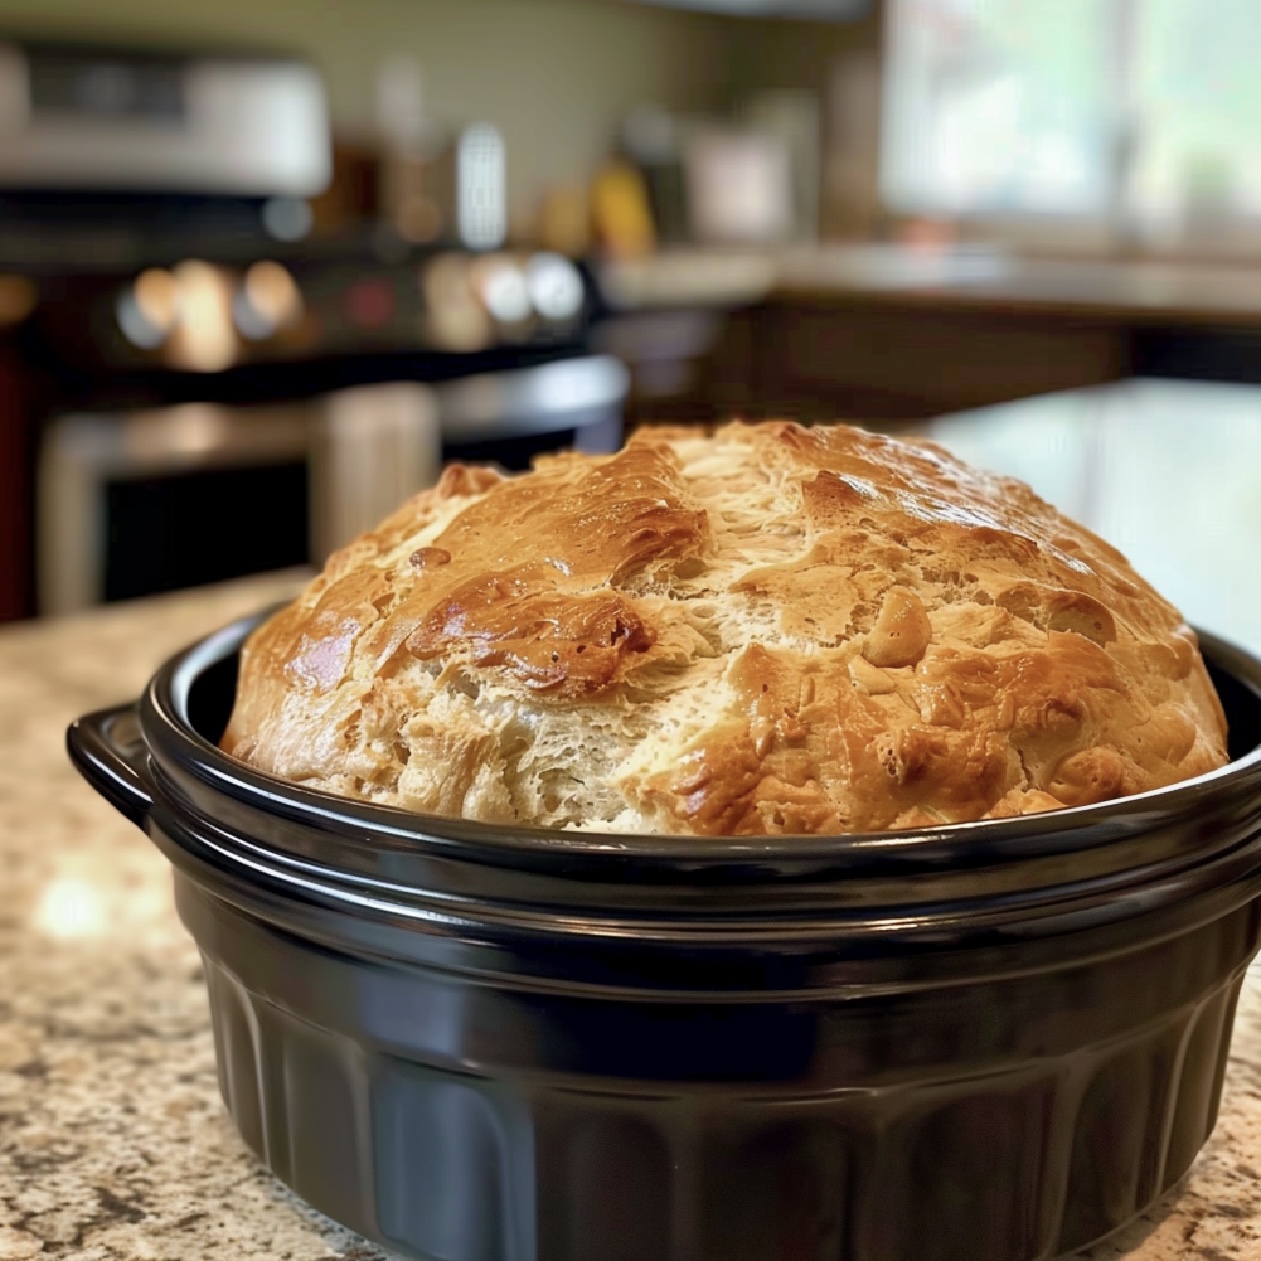 Homemade Beer Bread Magic, Discover the joy of baking with this simple slow cooker recipe that brings back warm memories.